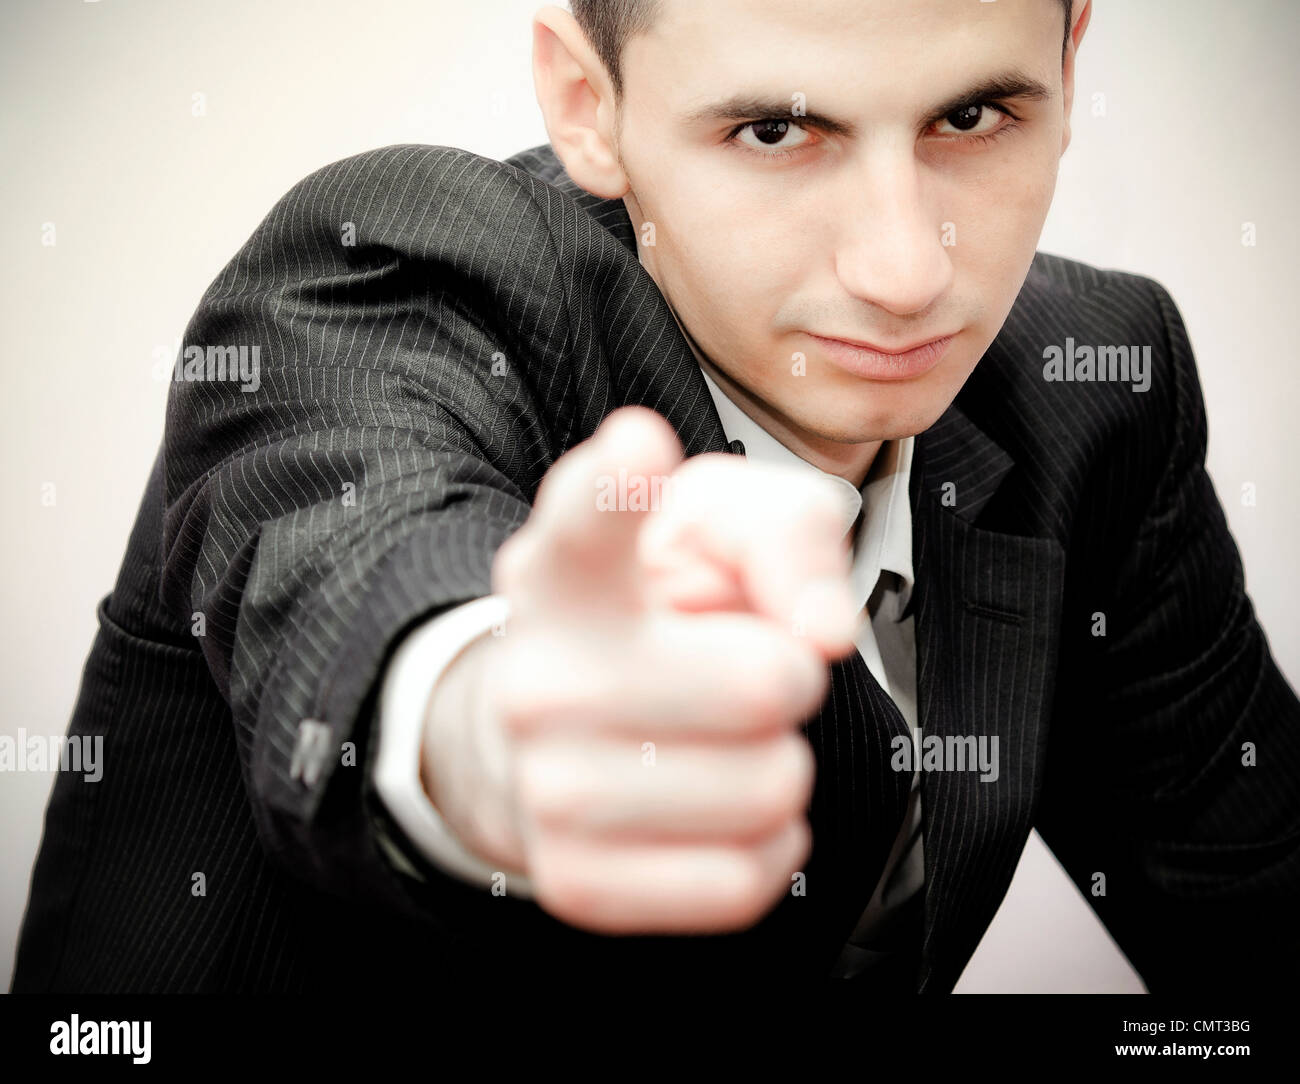 Young business man showing confidence Stock Photo